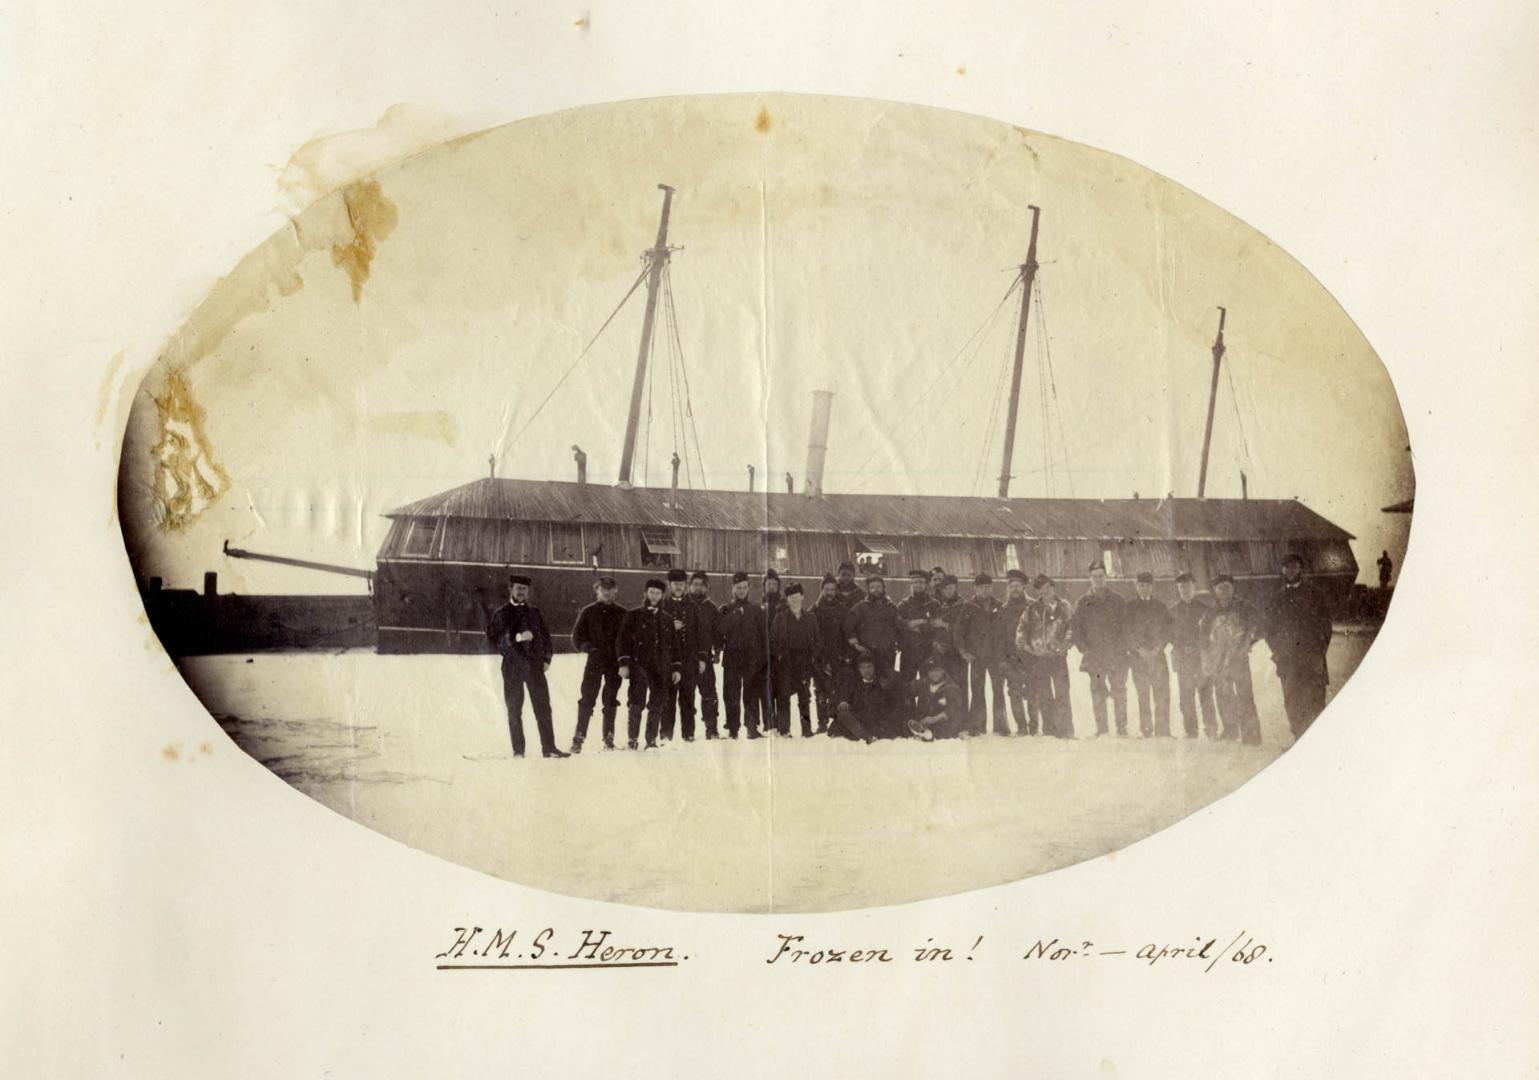 Image shows a group of people posing for a photo with a gunboat behind them.